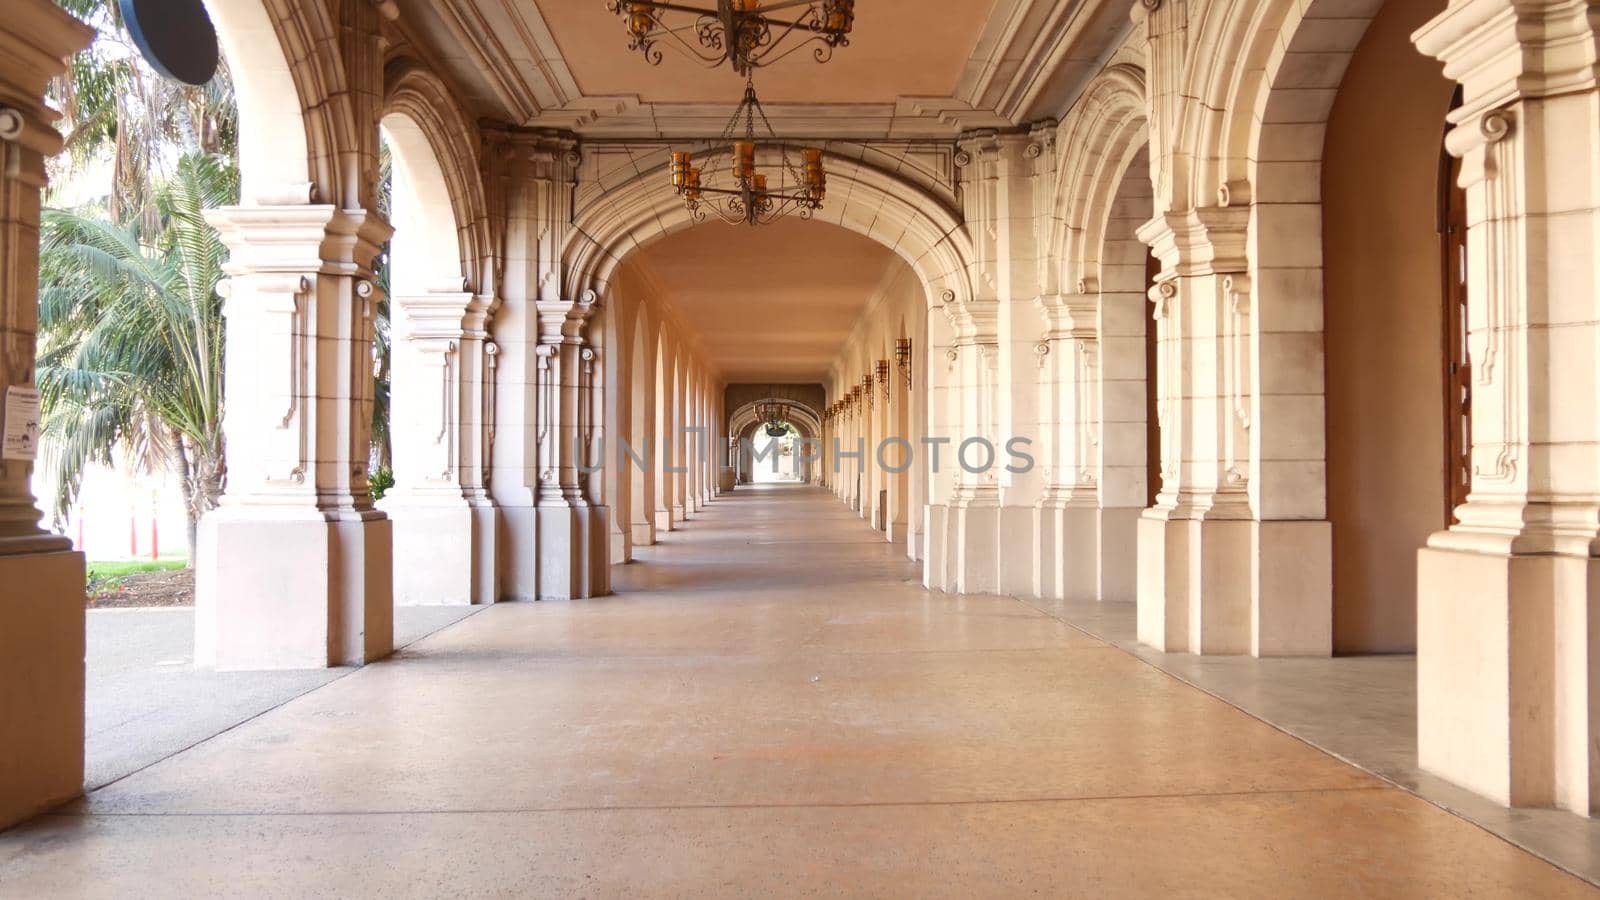 Spanish colonial revival architecture, arches and columns, San Diego Balboa Park by DogoraSun